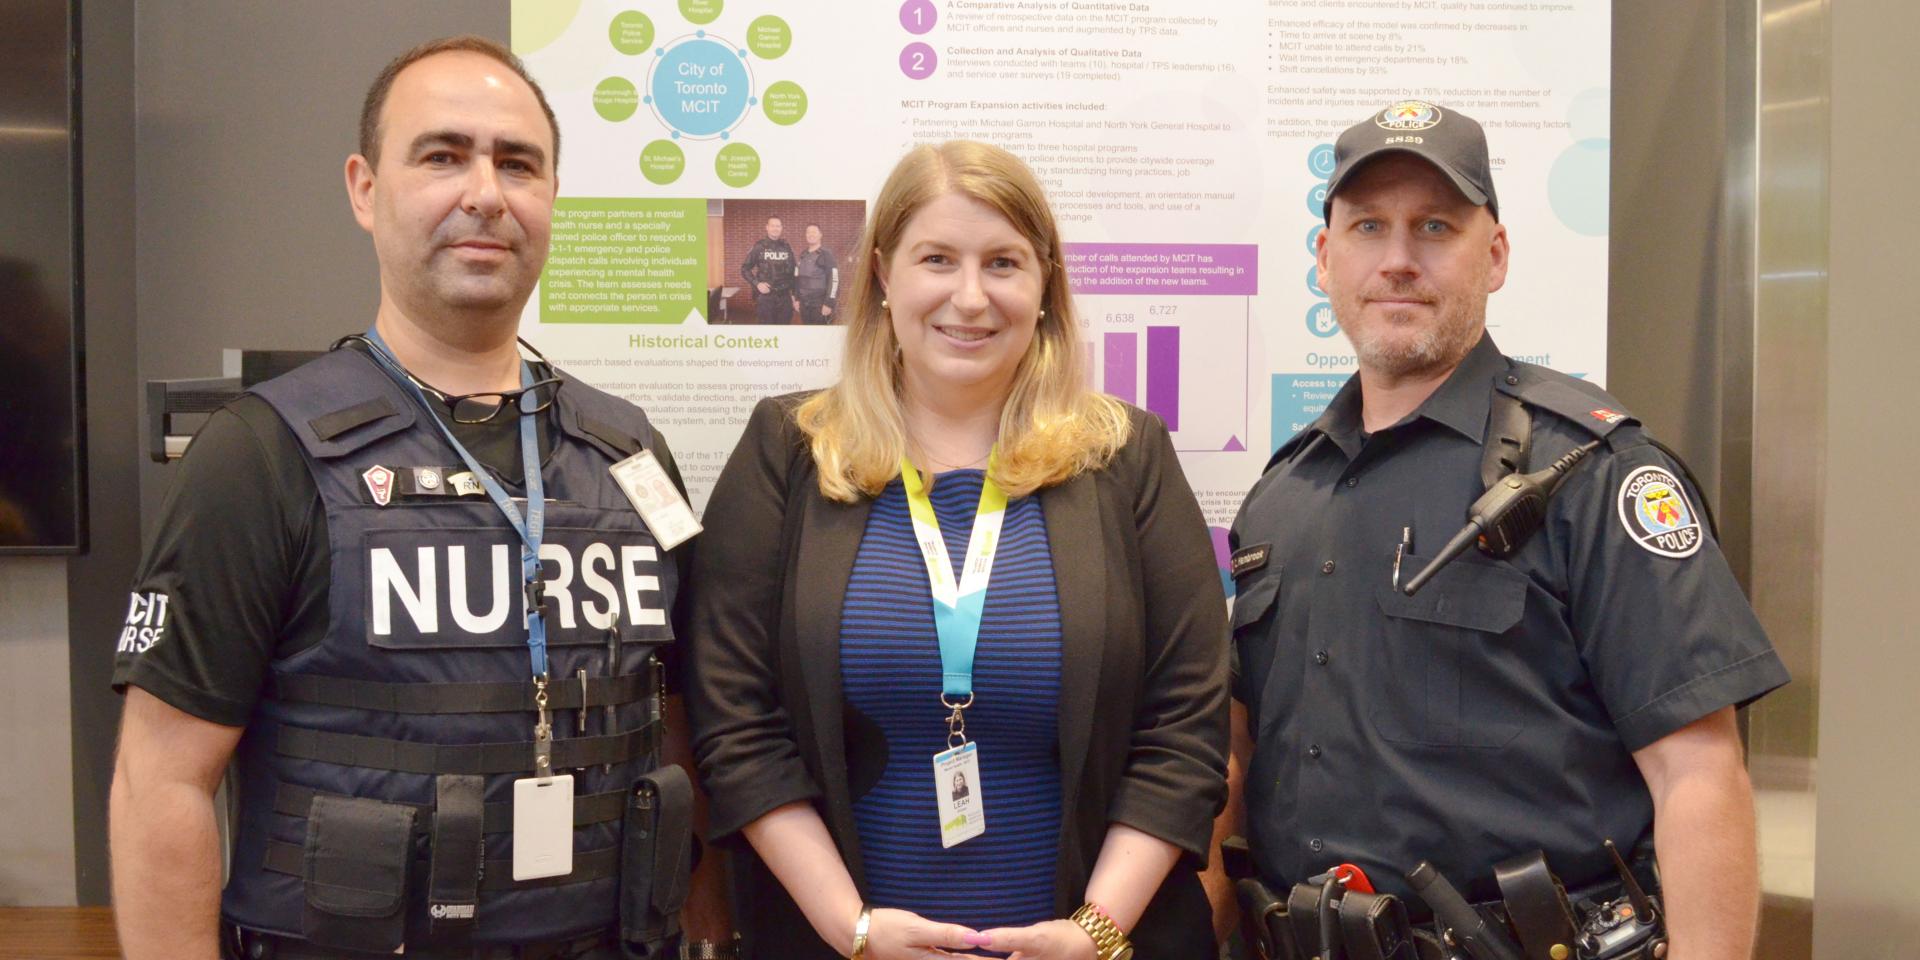 Project manager, nurse and police offer of the MCIT program